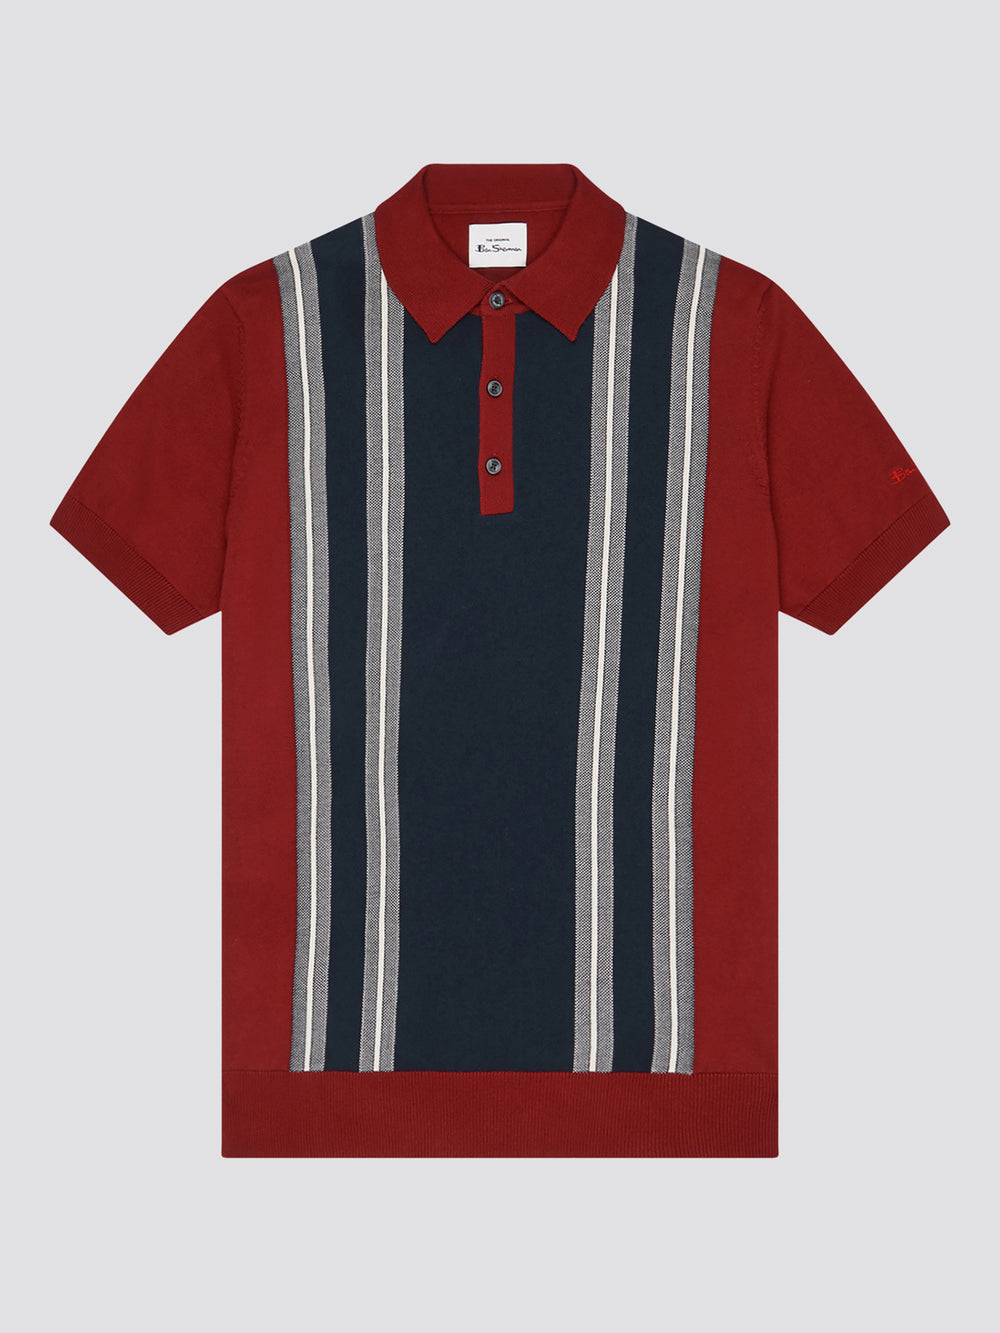 Iconic Vertical Textured Stripe Mod Knit Polo - Red - Ben Sherman